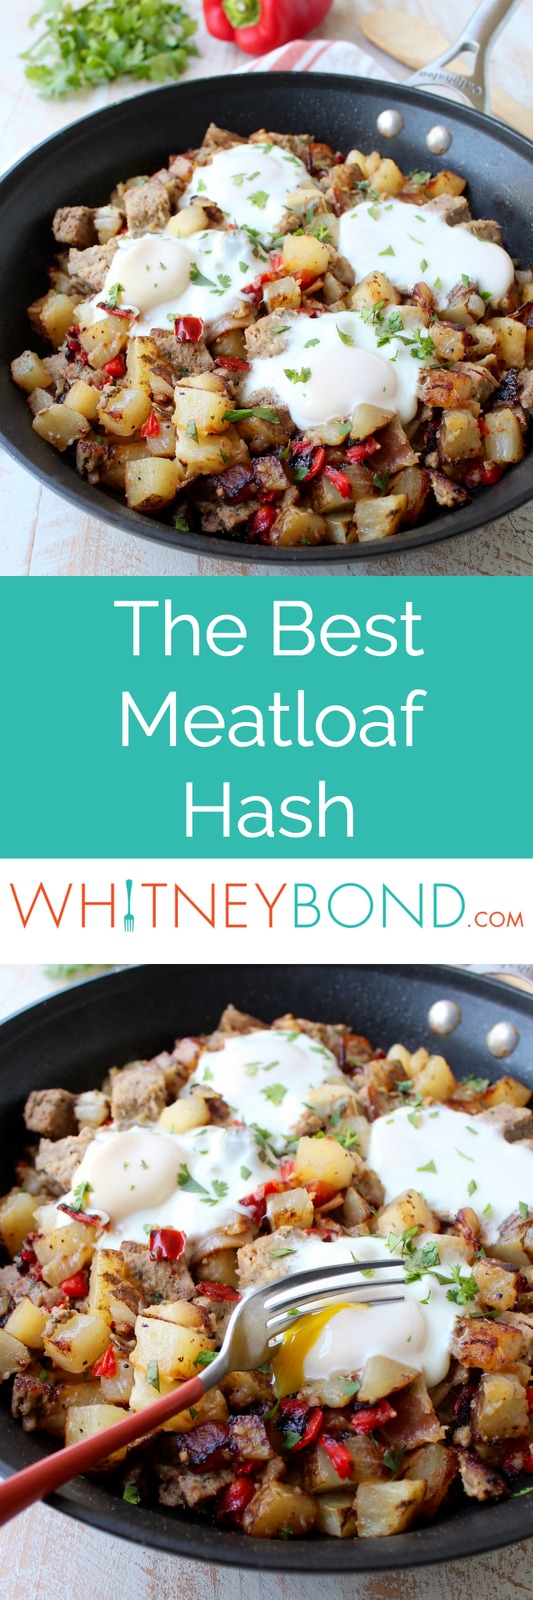 Meatloaf Hash Recipe - WhitneyBond.com